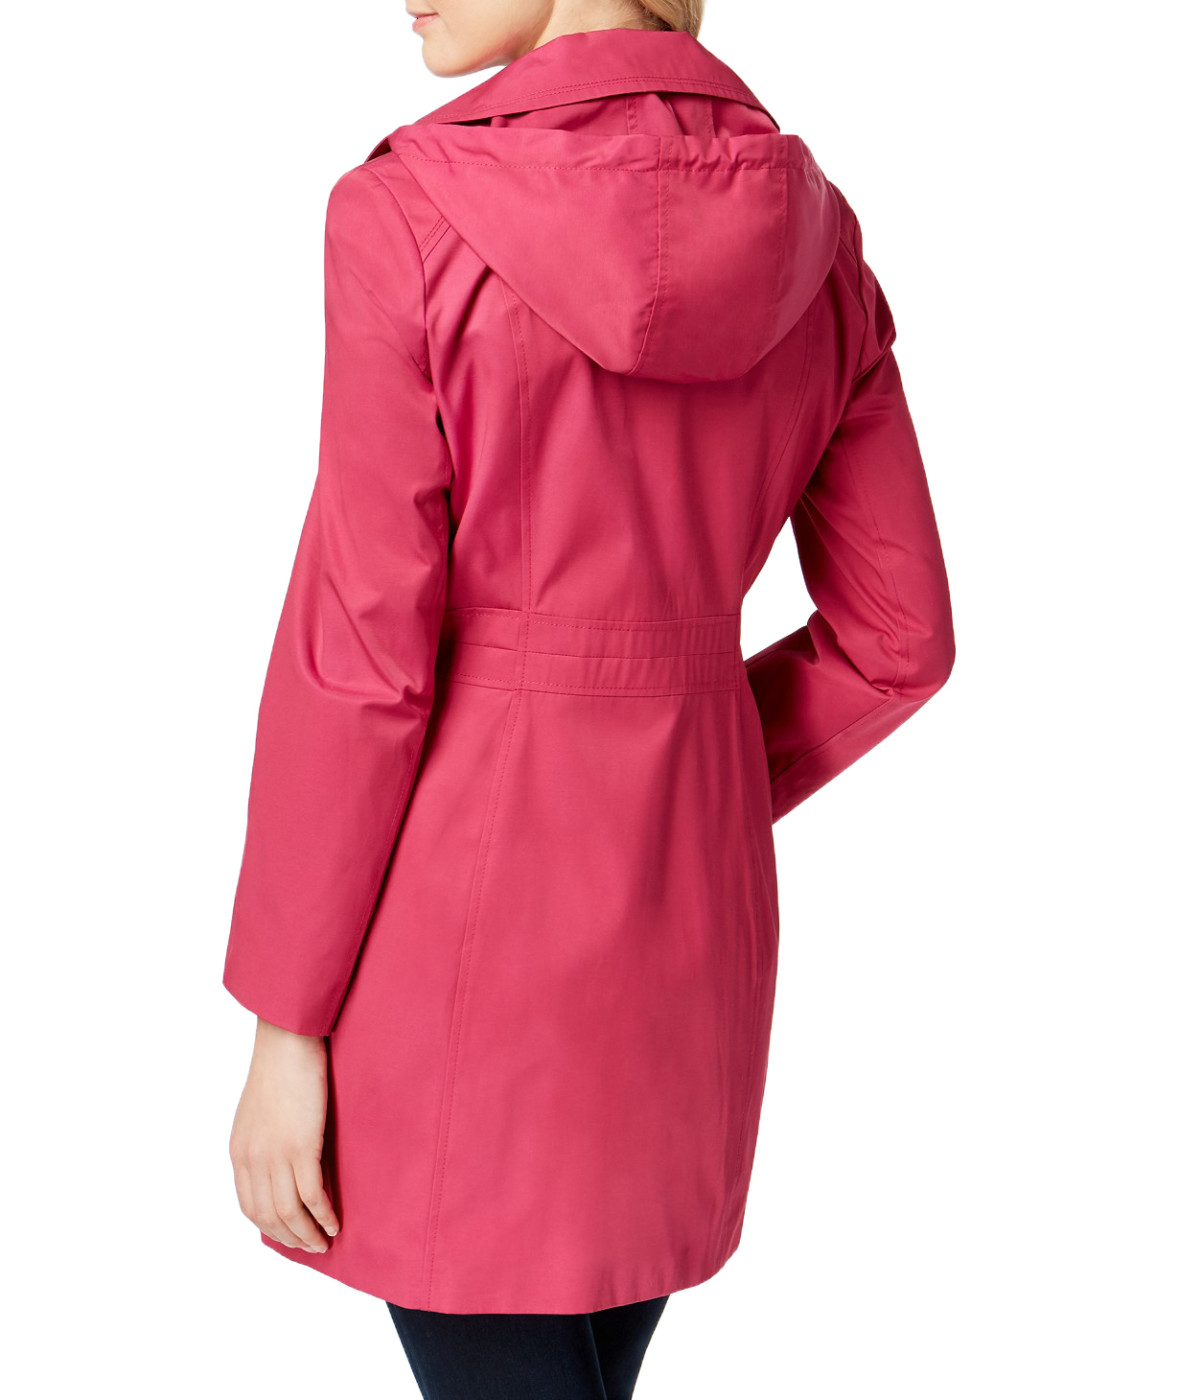 woocommerce-673321-2209615.cloudwaysapps.com-anne-klein-womens-pink-hooded-trench-coat